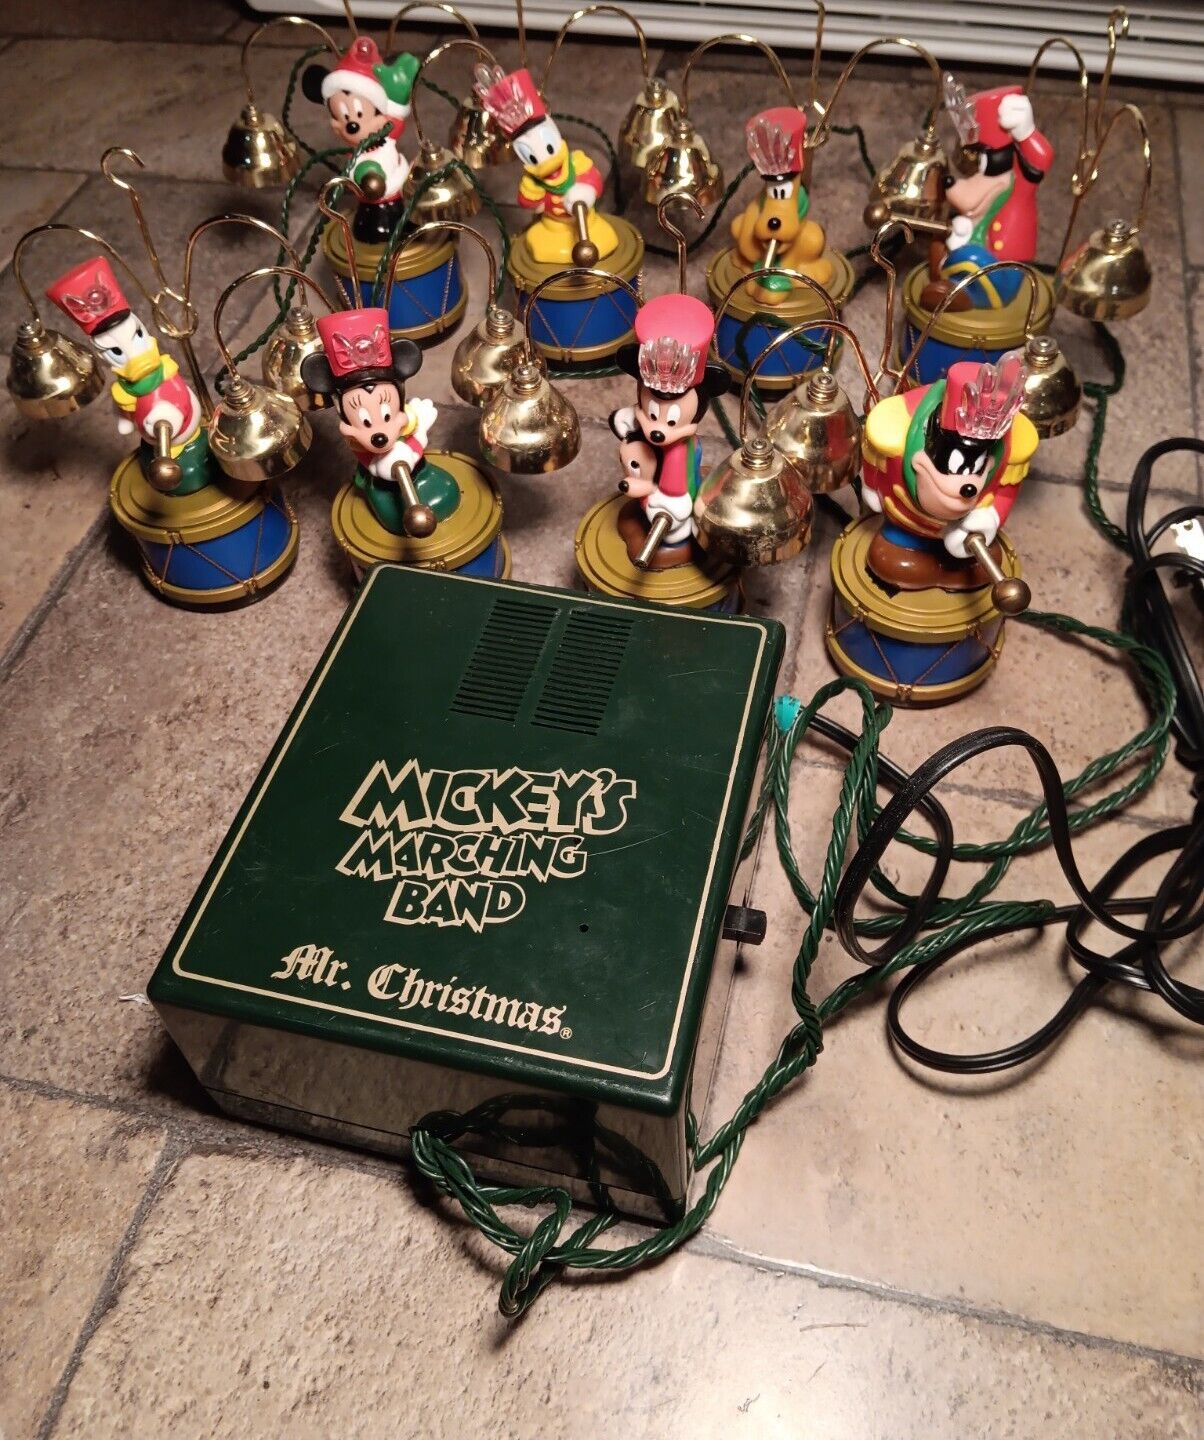 Vintage Mr. Christmas 1992 Disney Mickey's Marching Band Musical Bells(Works) 